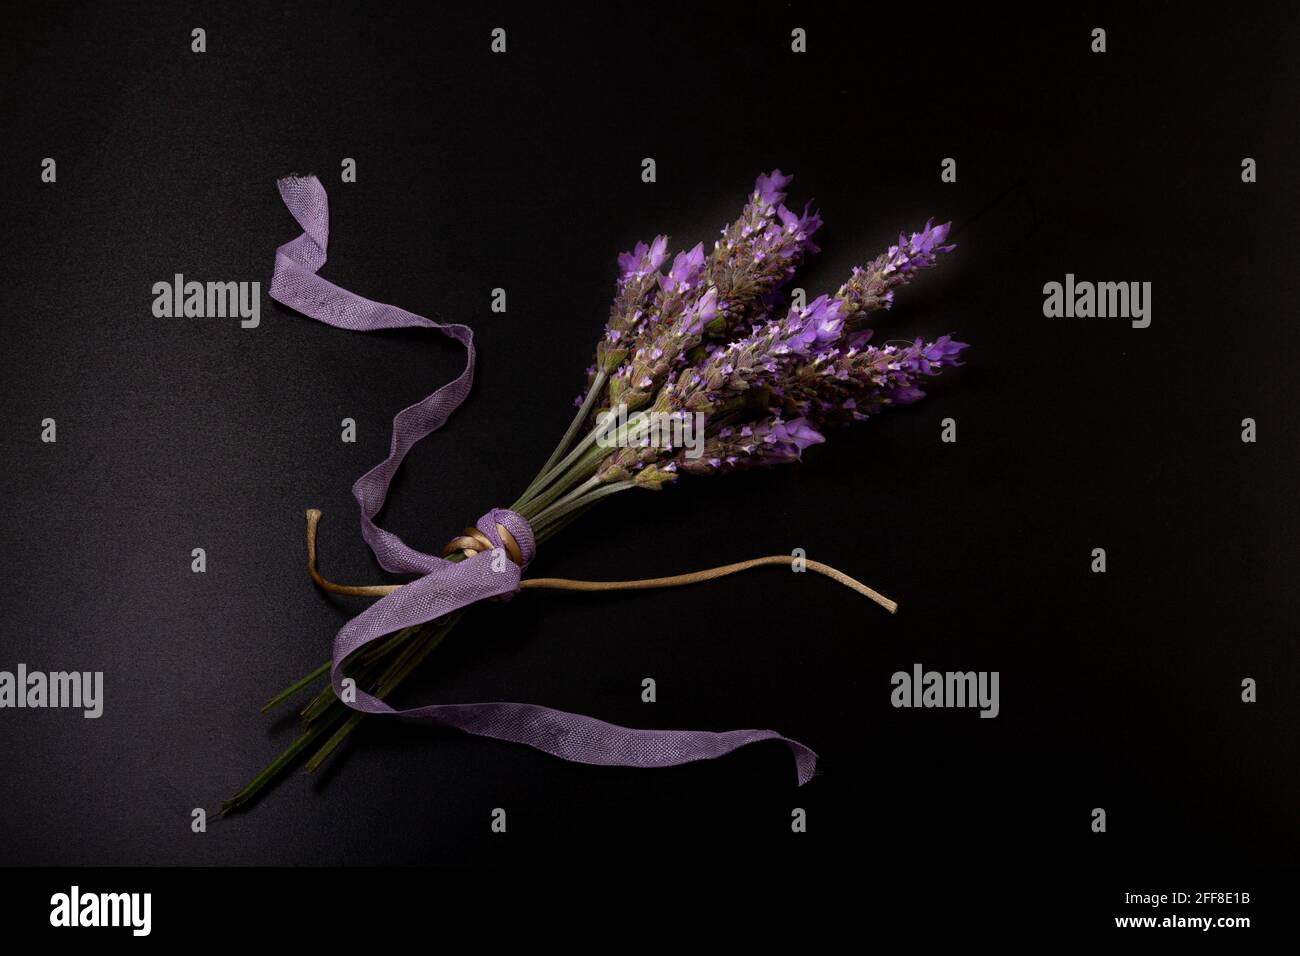 Bouquet of lavender flowers tied with cream colored rope and purple ribbon. All on black background Stock Photo